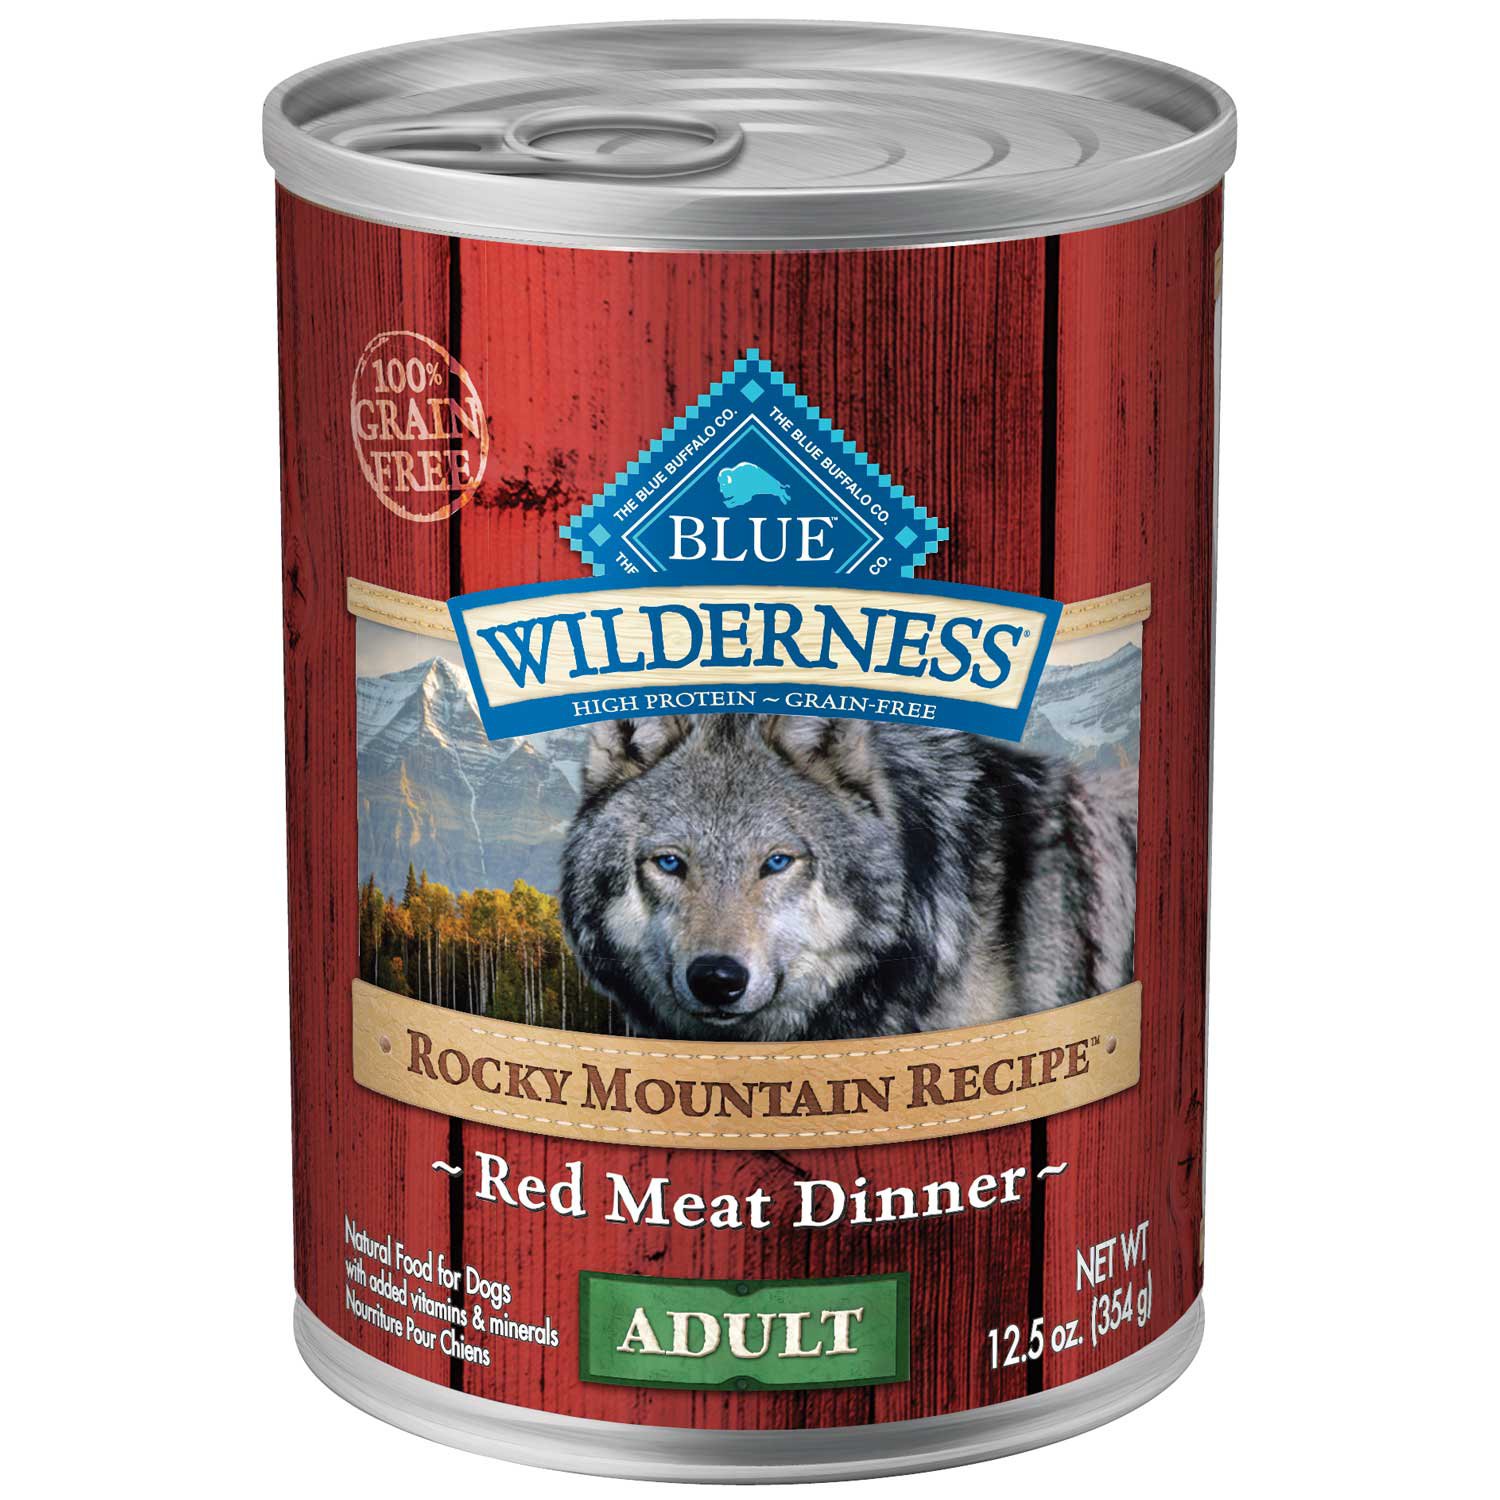 Blue Buffalo Dog Food Recalled for Health Risk | Daily ...